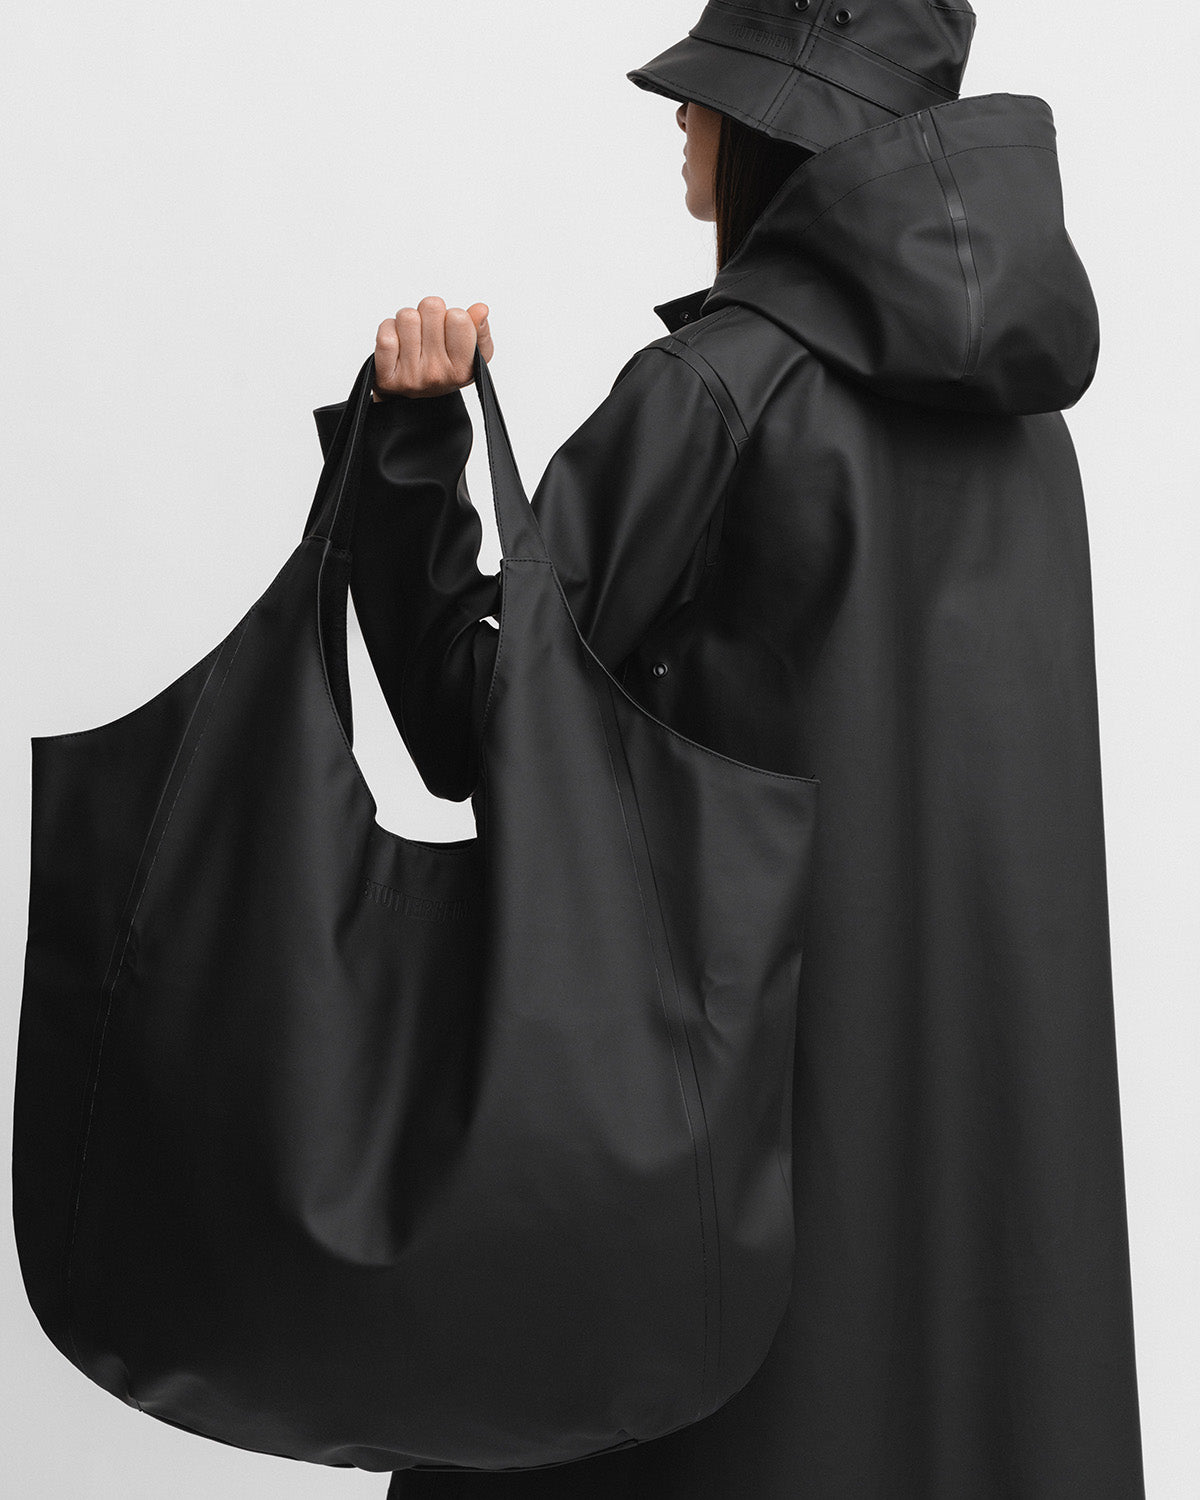 A woman with Tote Bag in color black by Stutterheim